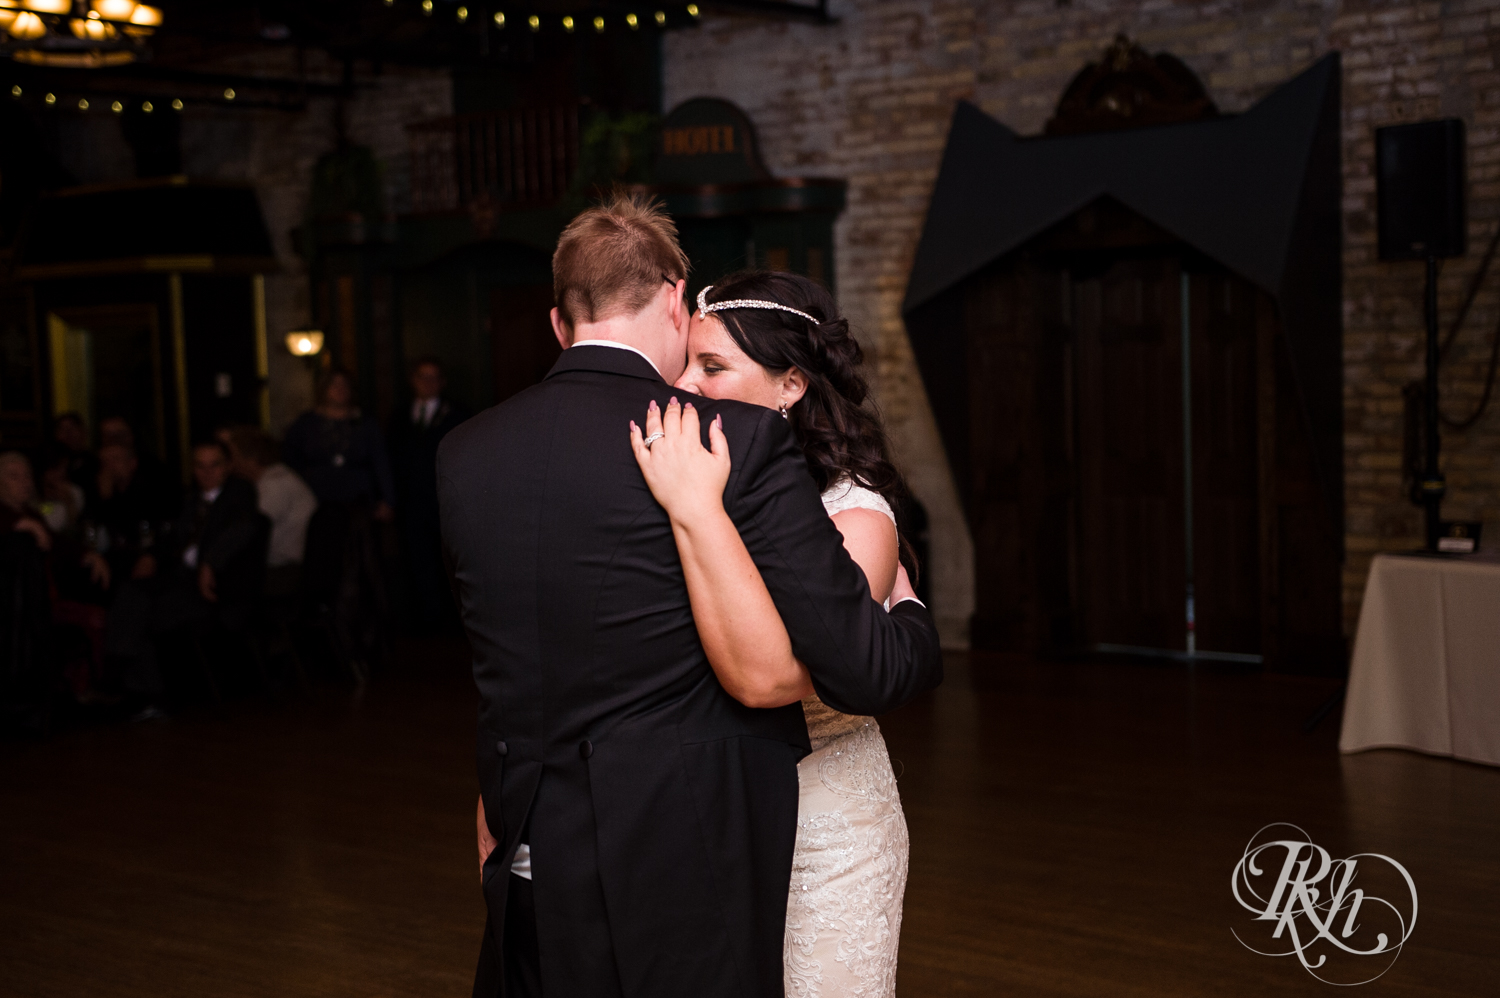 Bride and groom dance during indoor wedding reception at Kellerman's Event Center in White Bear Lake, Minnesota.